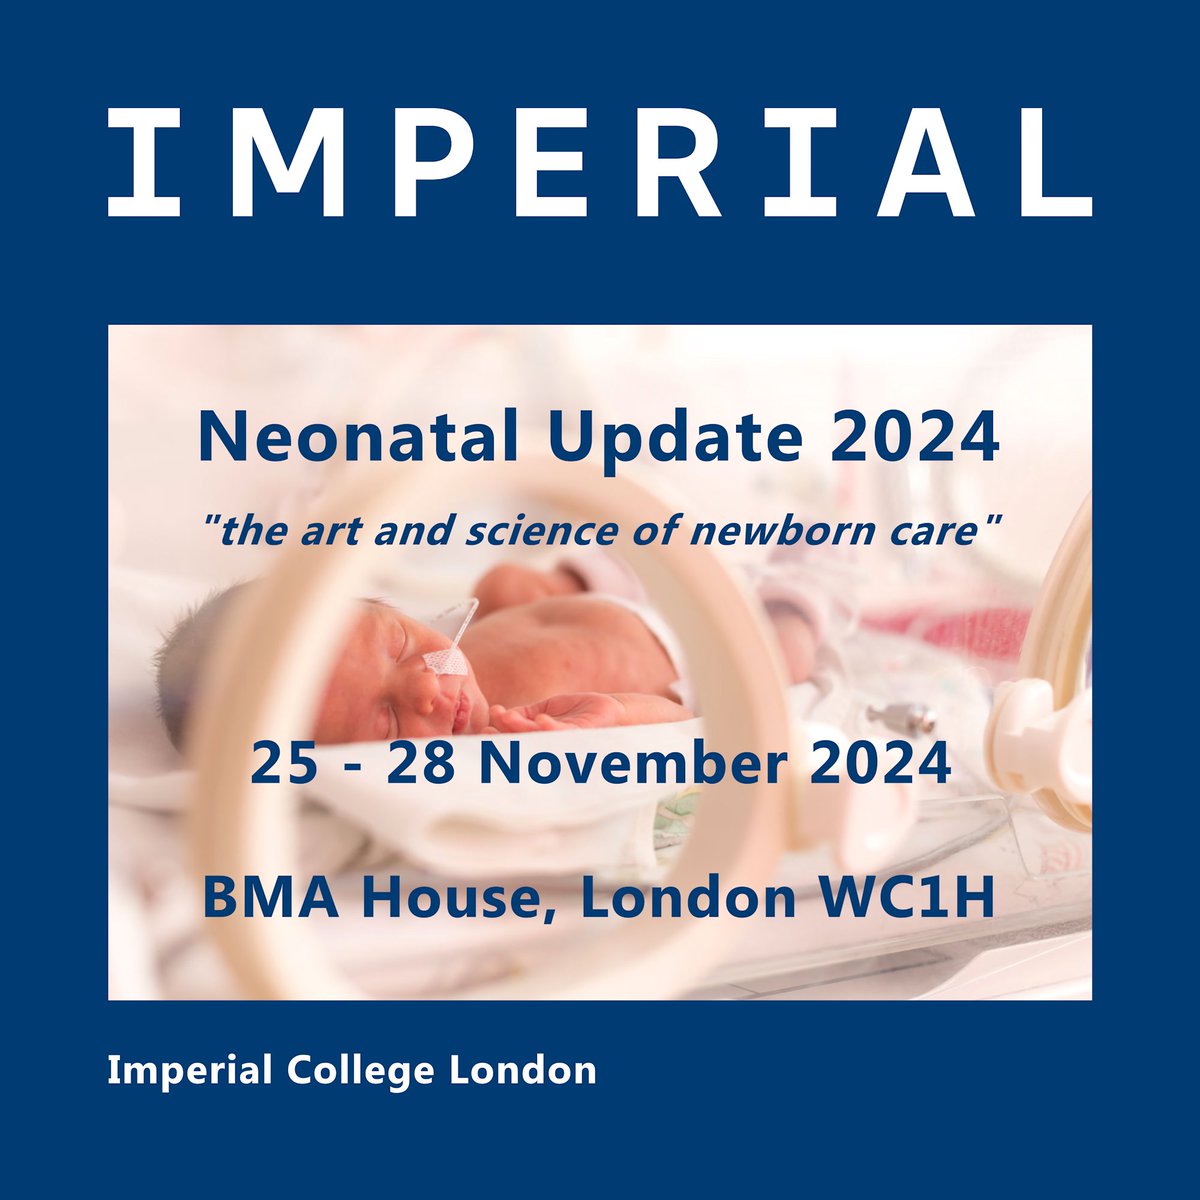 Are you a #Neonatal or #Paediatric researcher clinician or trainee? An Advanced Neonatal #Nurse #Practitioner? This is the event for you
Book your place today
bit.ly/NeonatalUpdate…
@RCPCHtweets @BAPM_Official @NNAUK1 @NeoNurses_Kenya @ScotNeoNurses @NeonatalNurses @EUperinatal